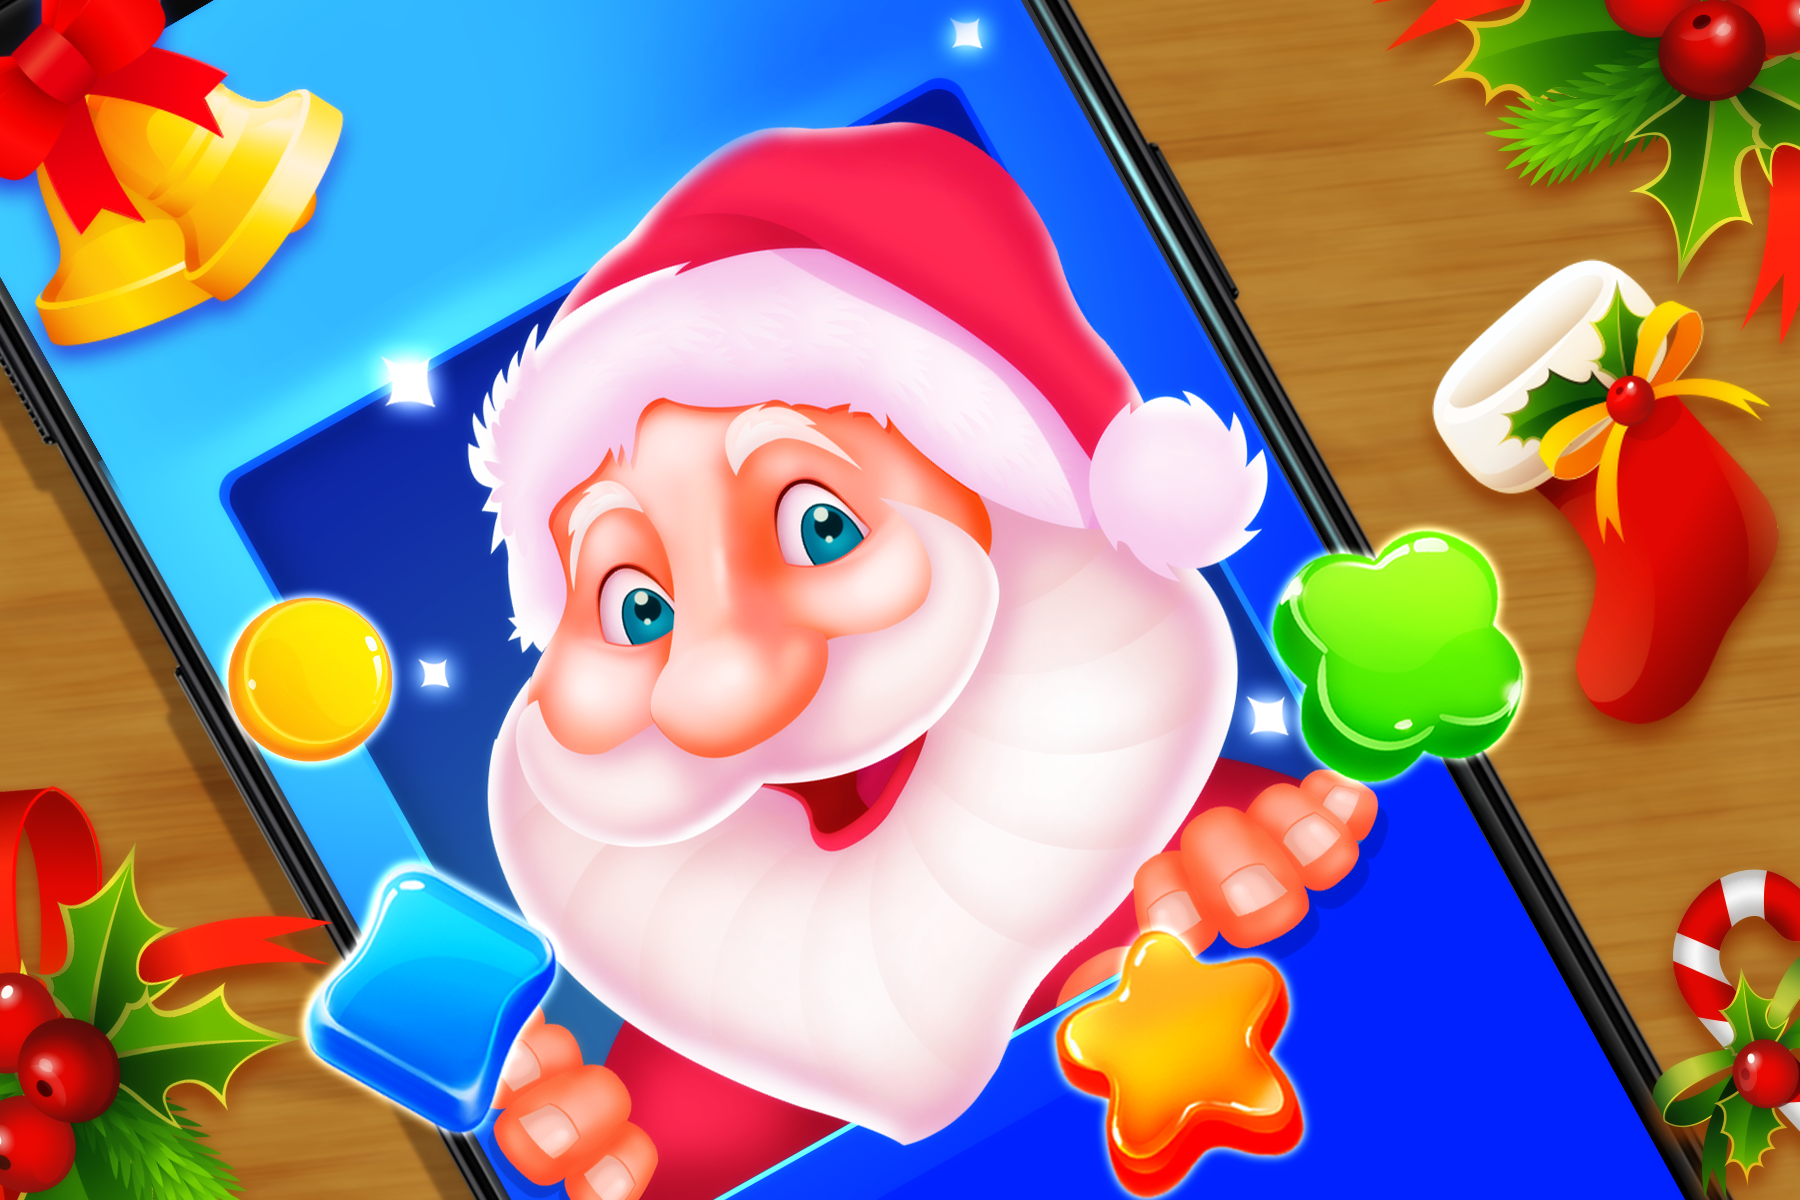 Festive fun…Let’s play with Santa in CHRISTMAS themes!